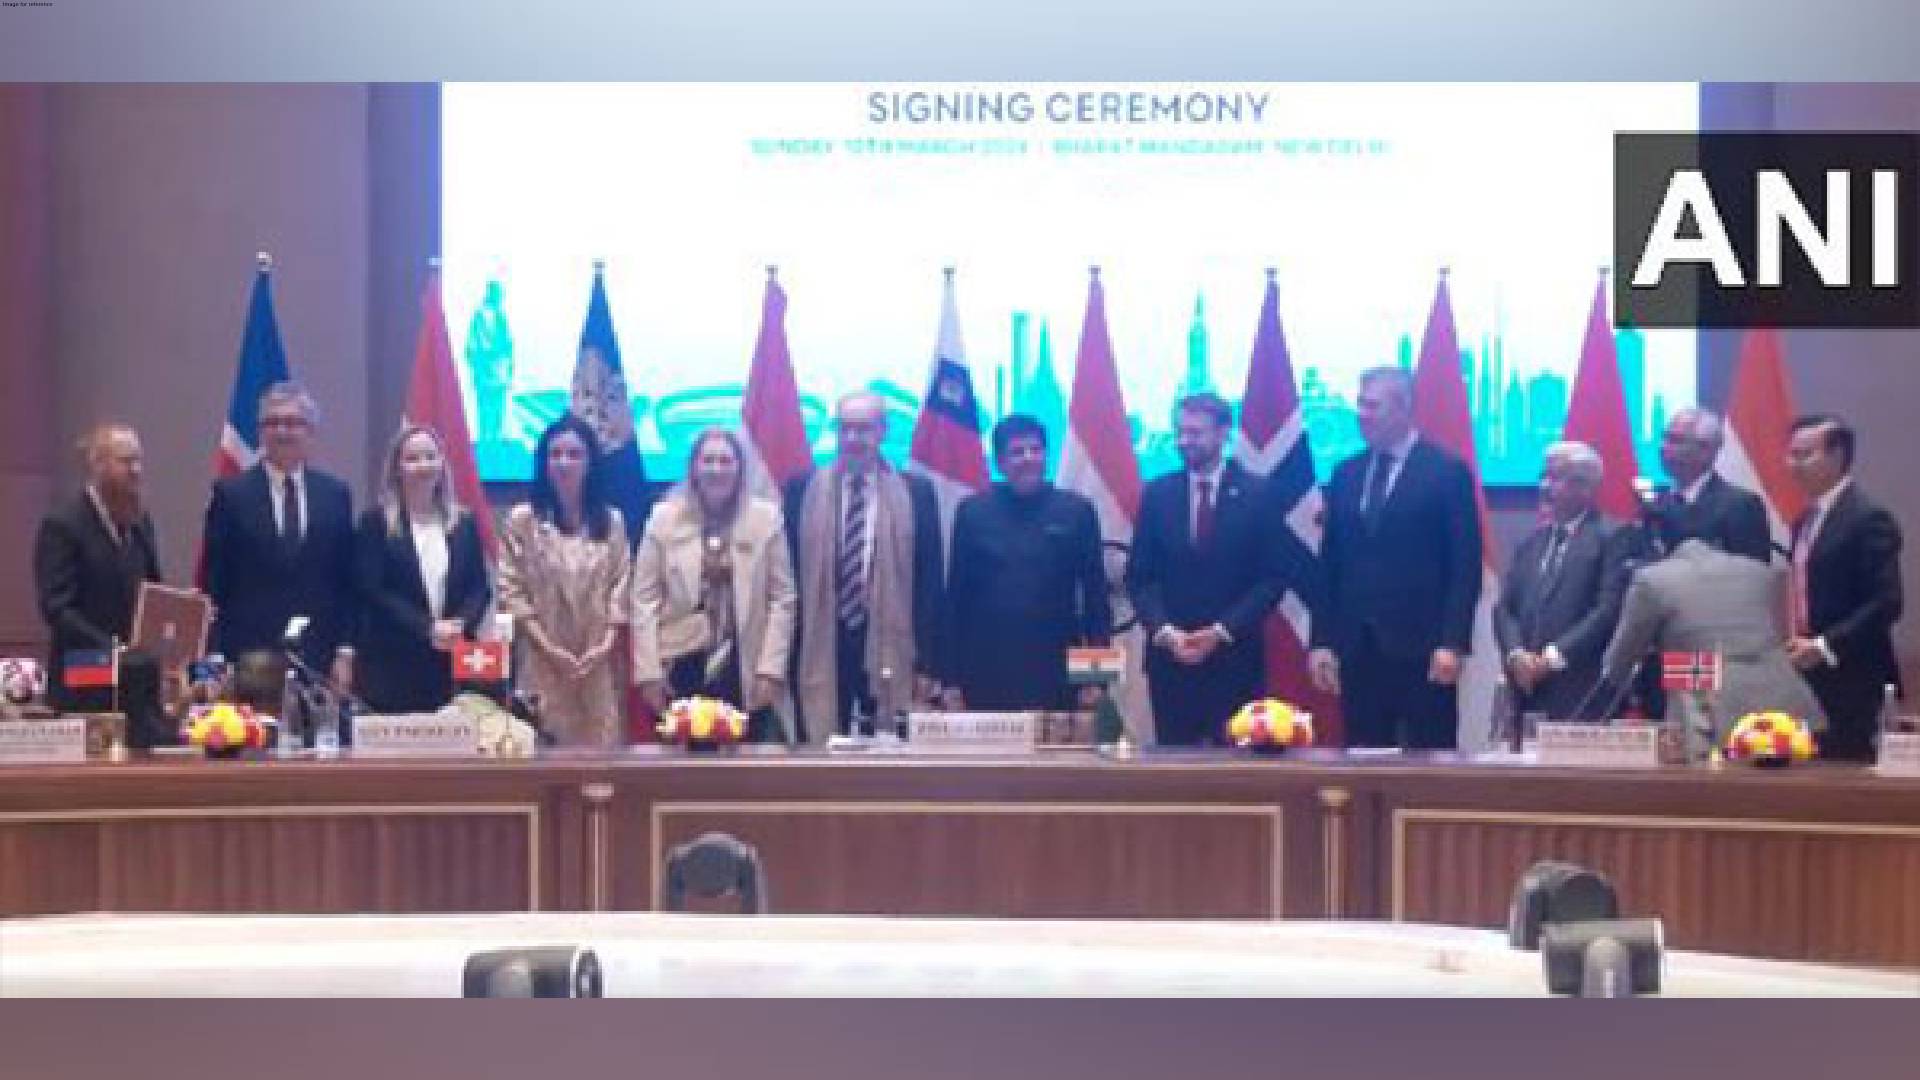 India signs free trade agreement with European Free Trade Association